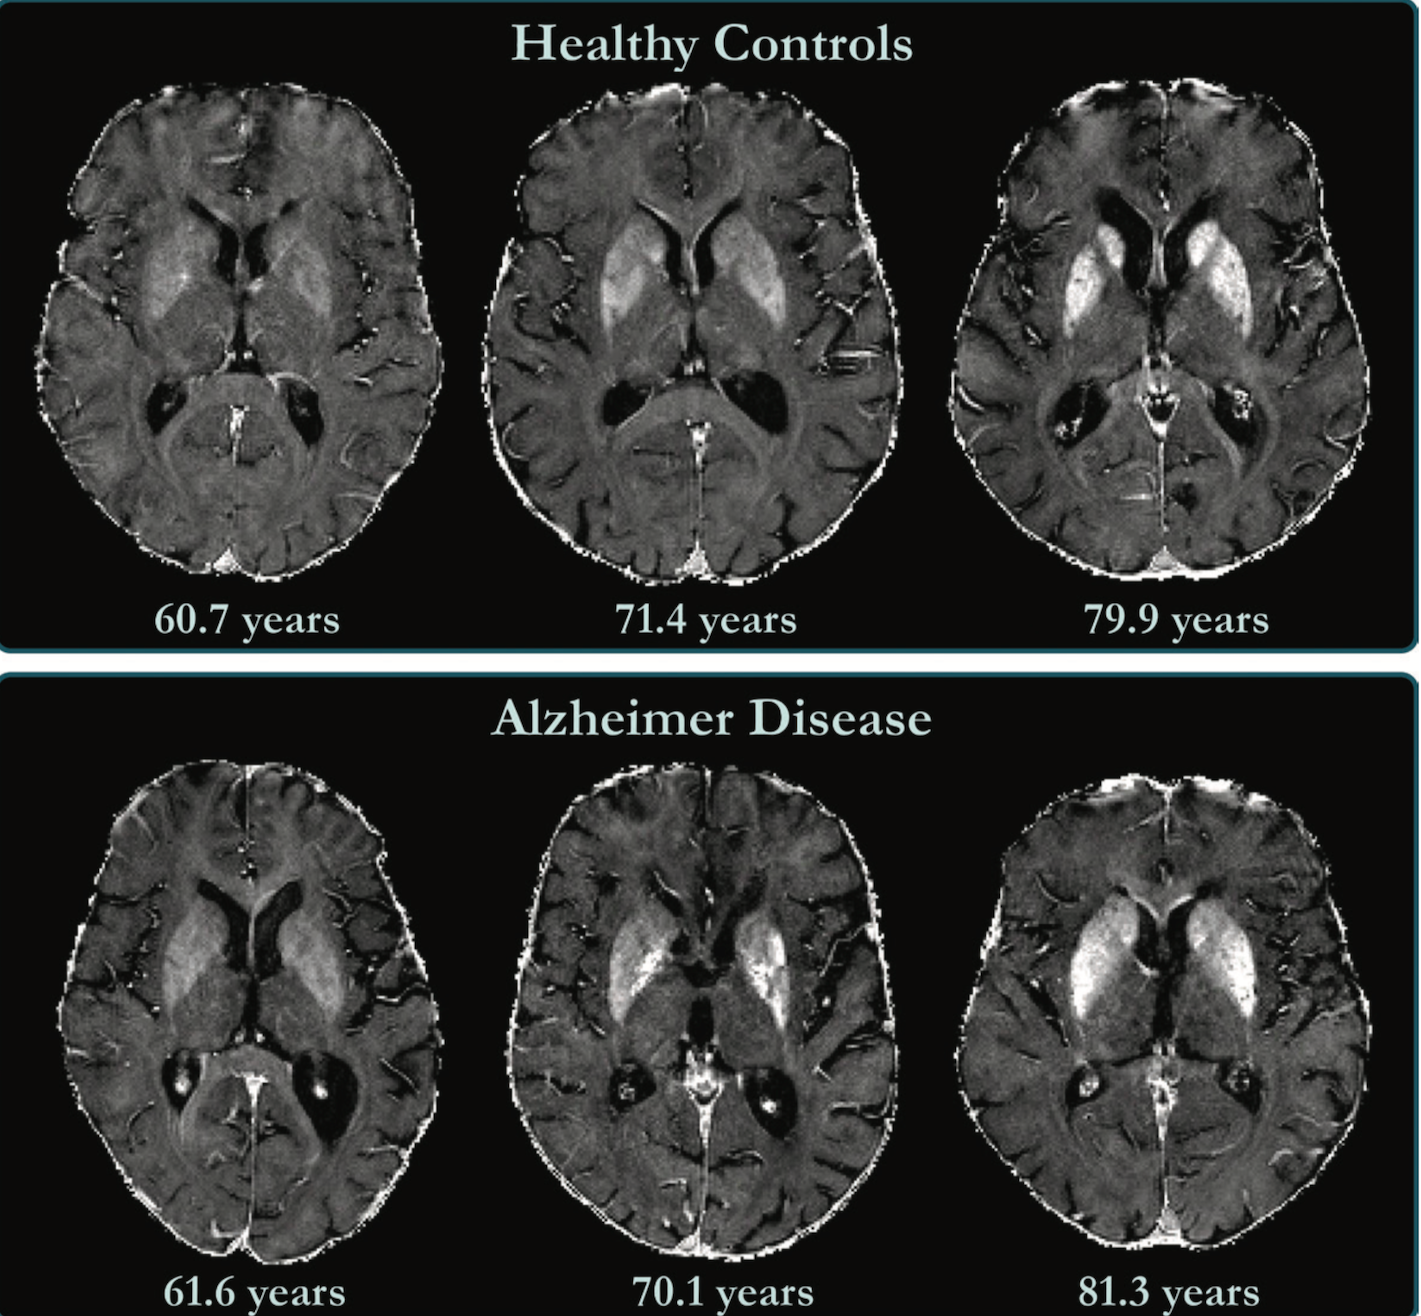 MRI Shows Link Between Higher Brain Iron Levels and Cognitive Decline in Alzheimer’s Patients